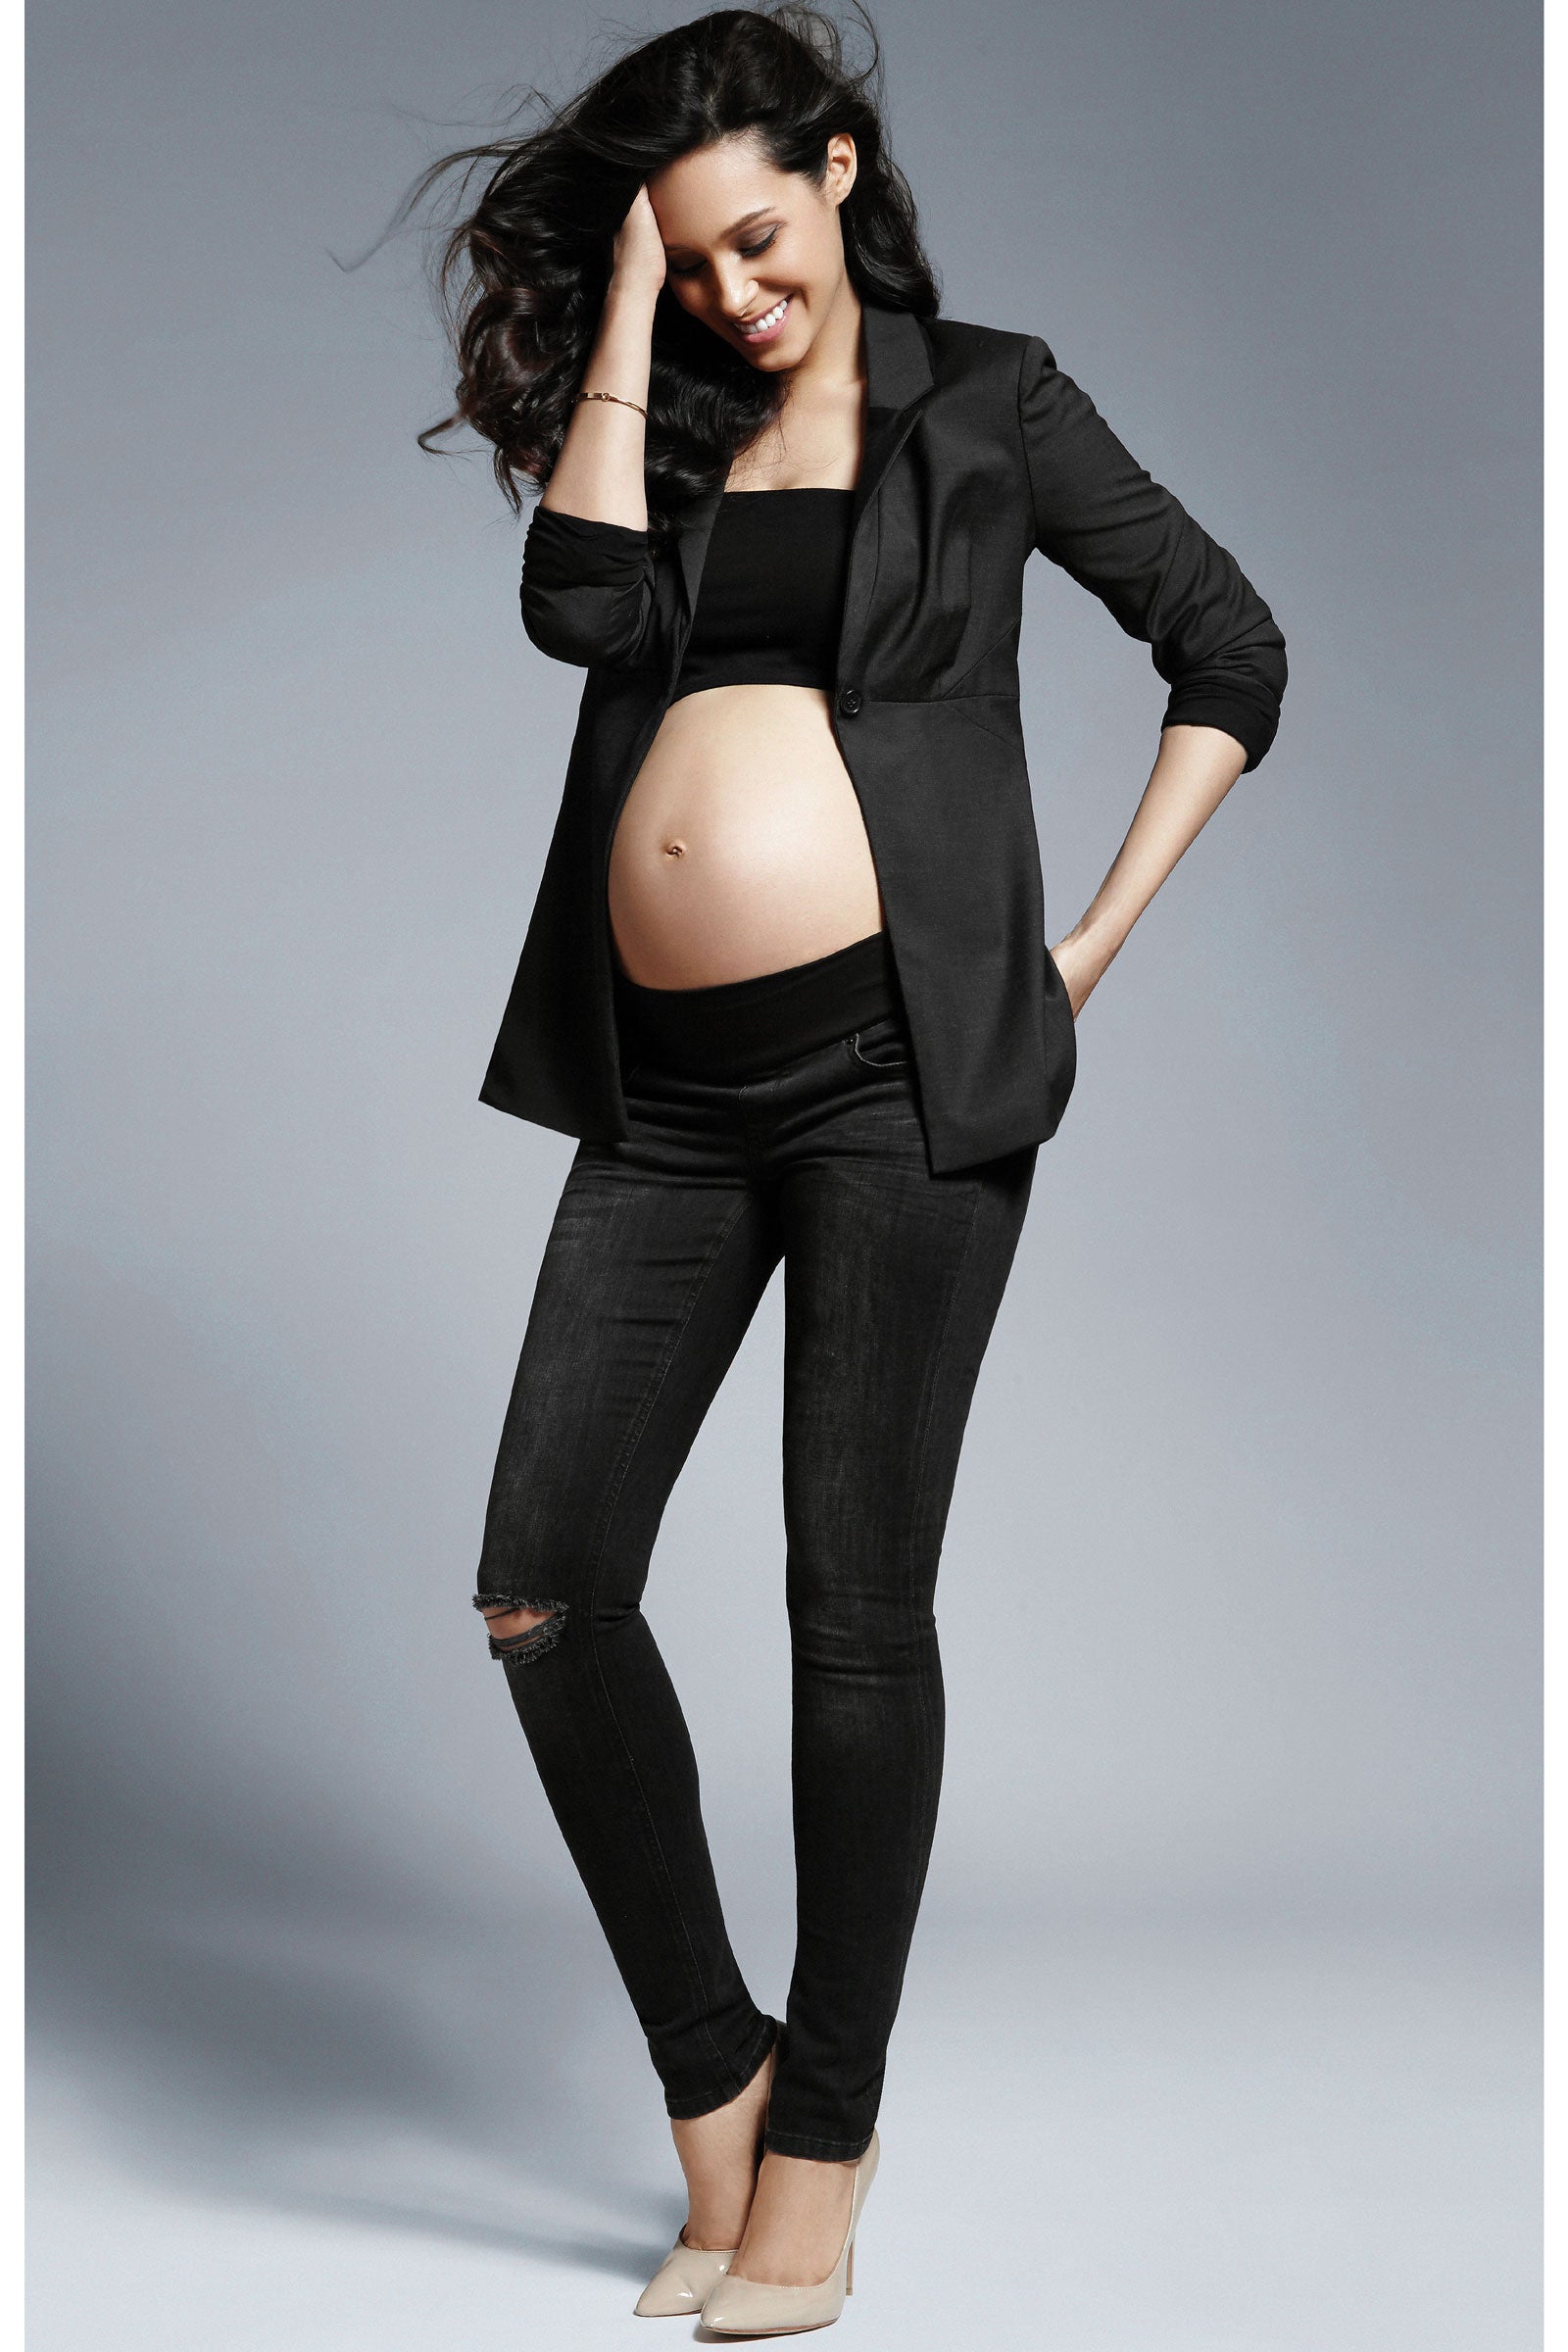 The comfiest jeans for all mamas - Seraphine Maternity